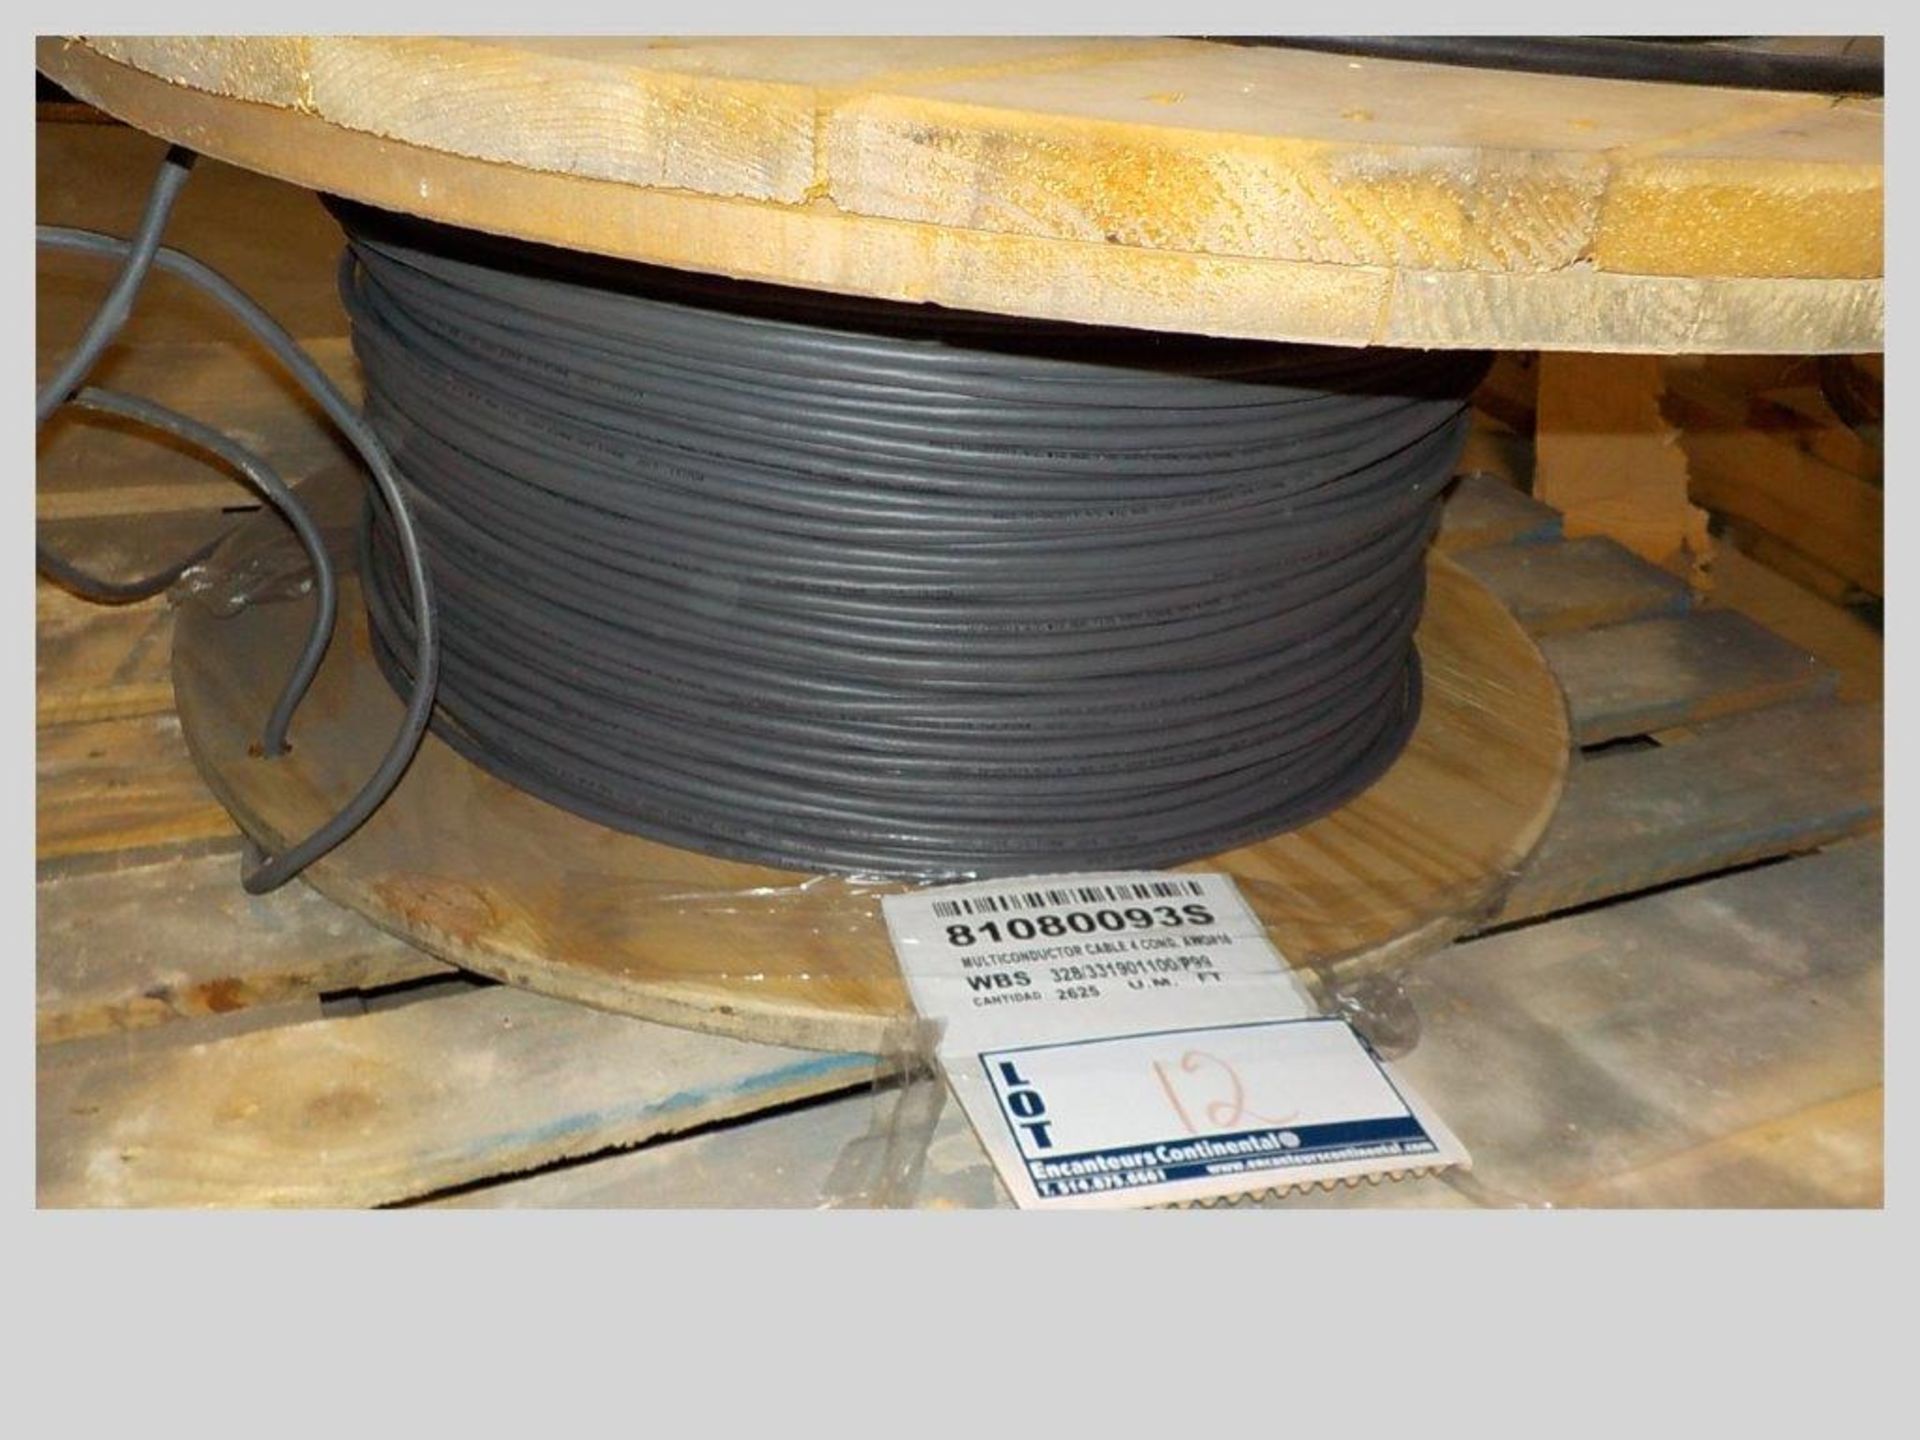 lot: wire / fils: Multiconductor cable, 4 cond. (2,625')